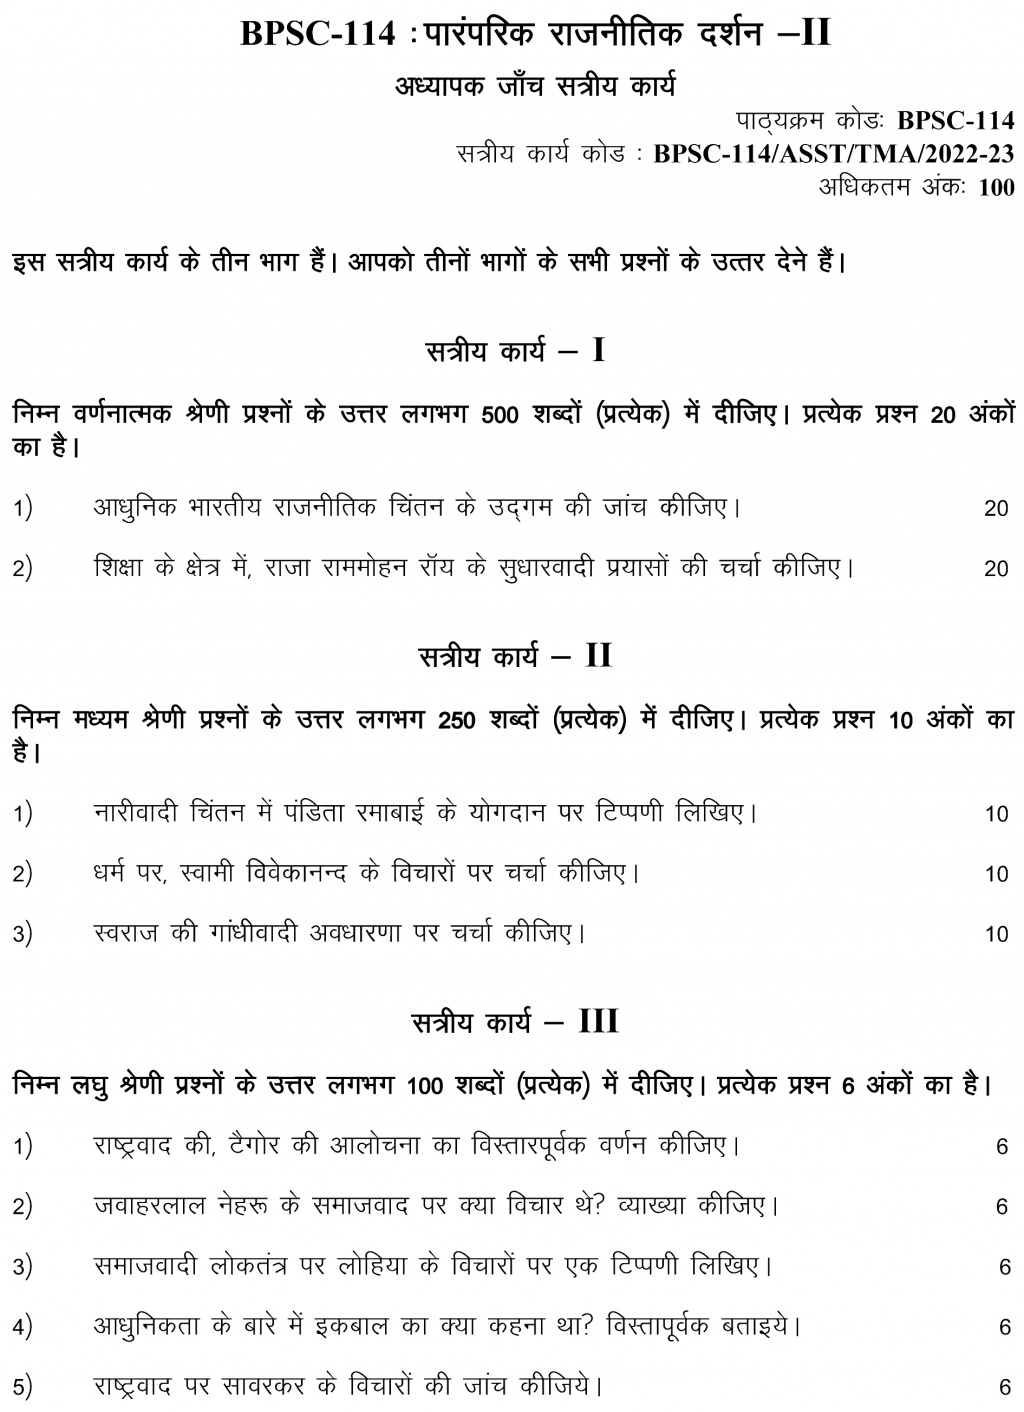 IGNOU BPSC-114 - Indian Political Thought-II Latest Solved Assignment-July 2022 – January 2023